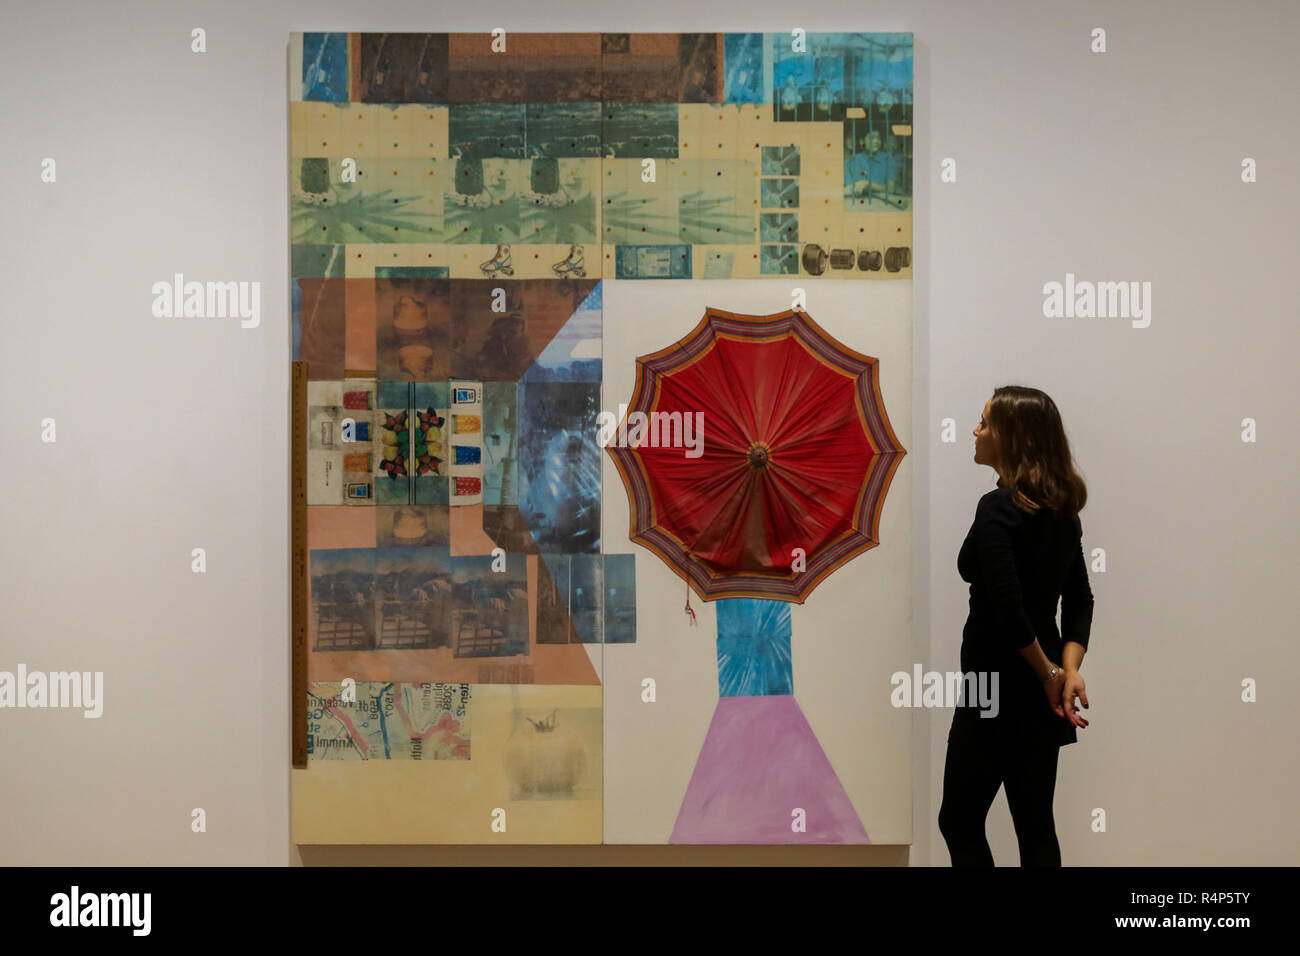 Galerie Thaddaeus Ropac. Mayfair, London. UK. 28 Nov 2018. A woman views 'Lipstick (Spread)', 1981 - Mixed media on two attached panels. Preview of first UK exhibition dedicated to Monumental Series of Robert Rauschenberg Spreads dedicated to the American artist's Spreads series at Galerie Thaddaeus Ropac in Mayfair. Robert Rauschenberg will be on display from 28 November to 26 January 2019.   Credit: Dinendra Haria/Alamy Live News Stock Photo